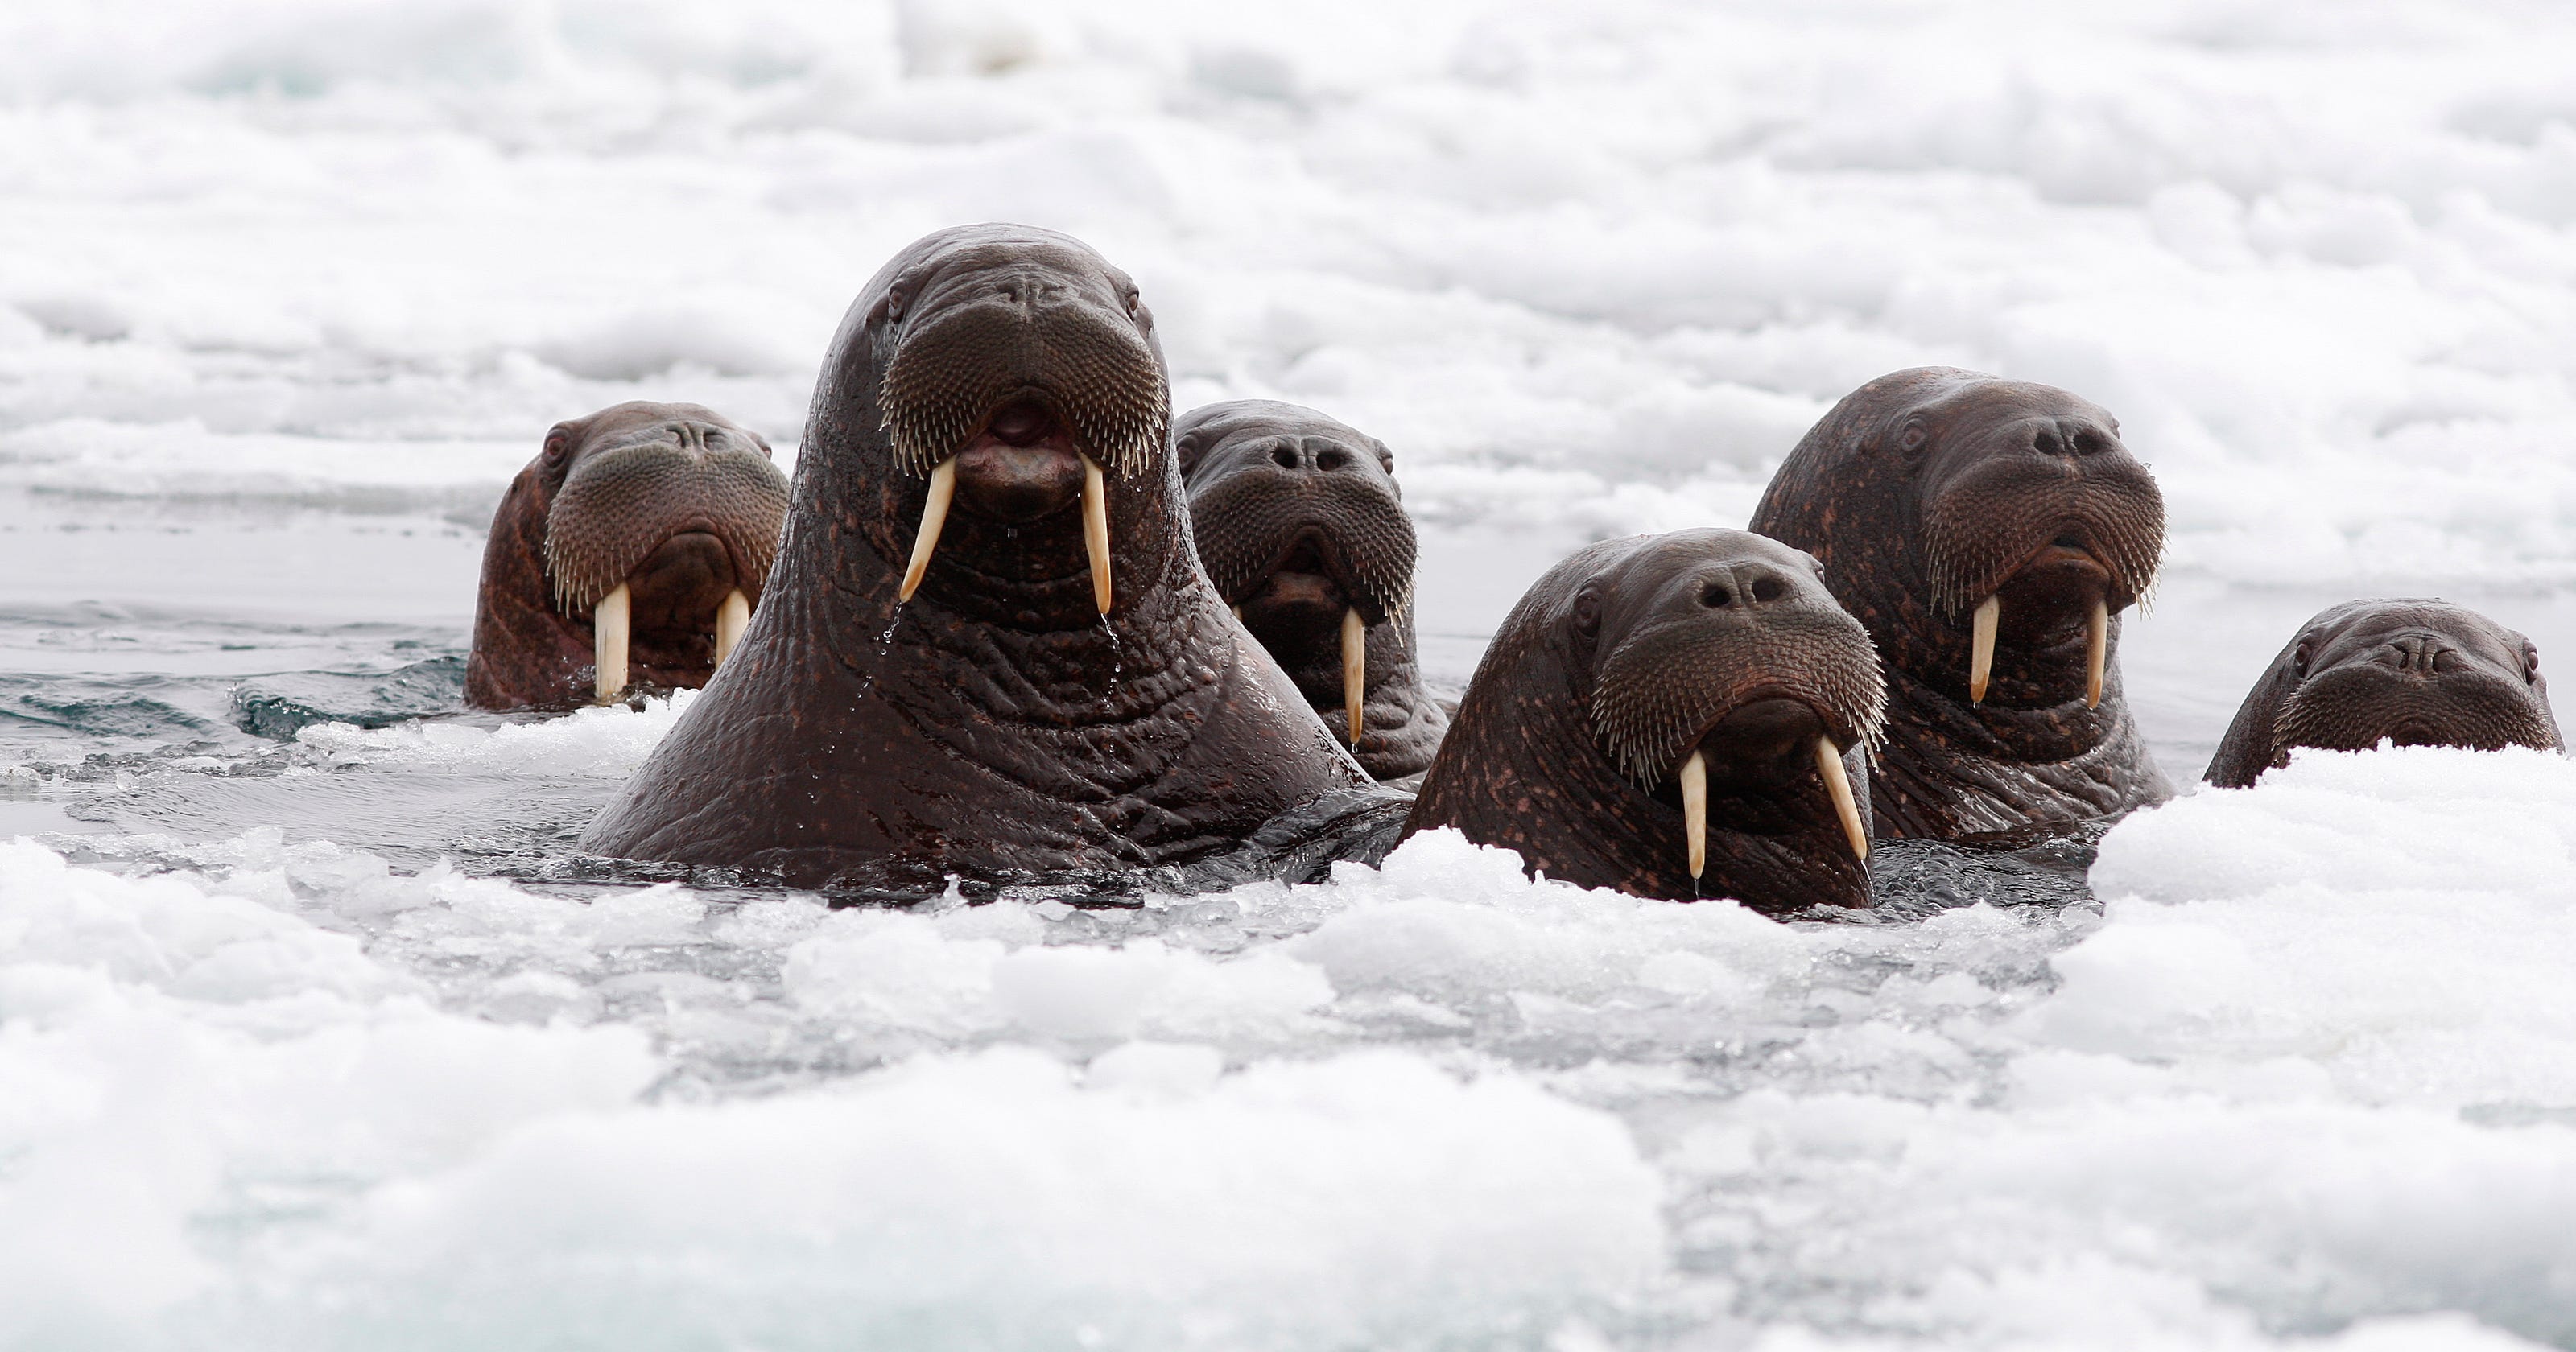 Sign of warming: 35K walruses 'haul out' on Alaskan shore